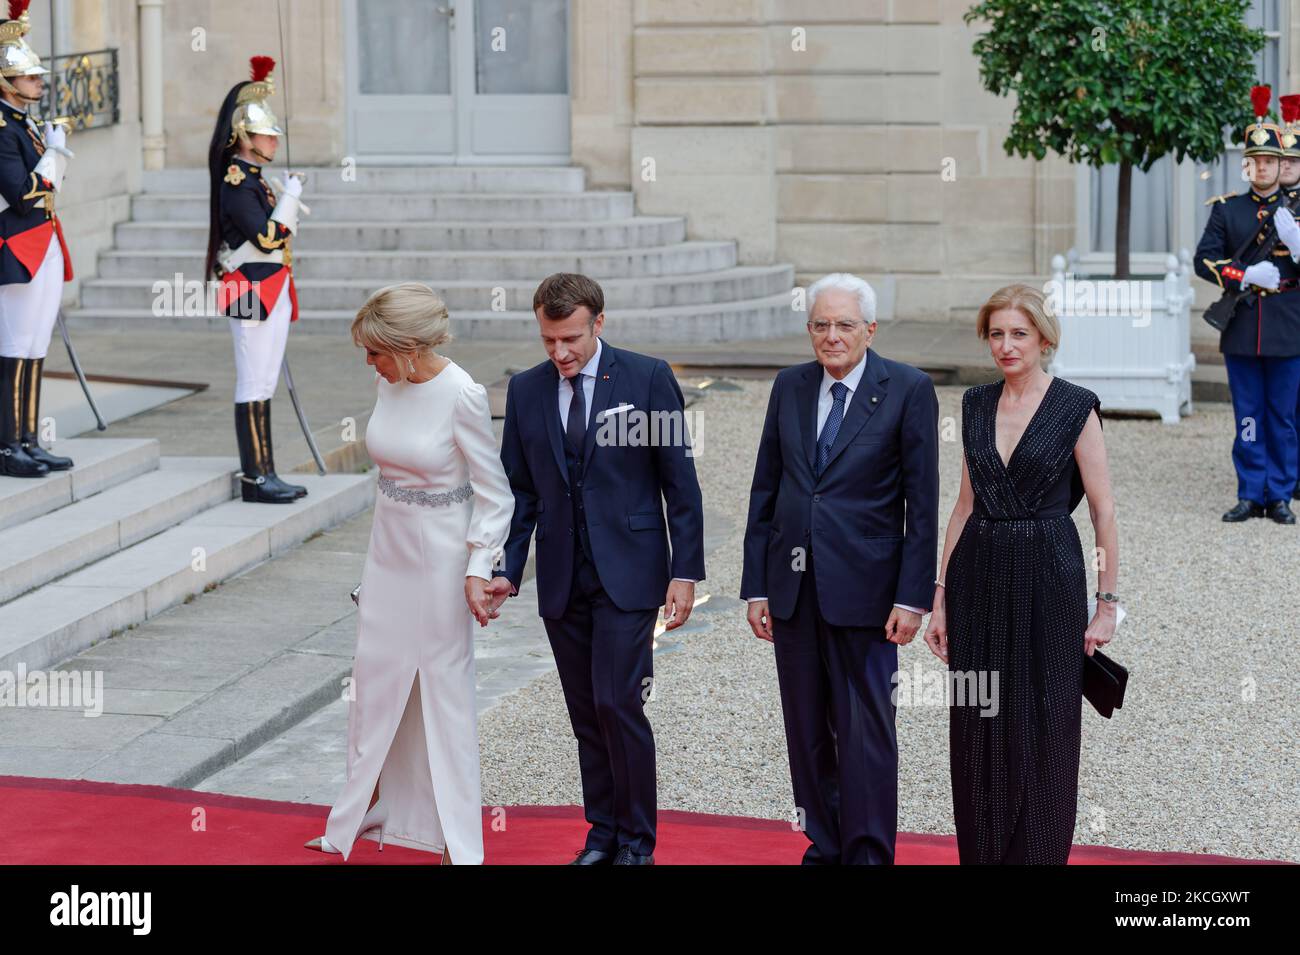 Italian President Sergio Mattarella (C)and his daughter Laura Mattarella (L) arrive for state diner with French President Emmanuel Macron (C) and his wife Brigitte Macron (L) at the Elysee Palace in Paris, on July 5, 2021 (Photo by Daniel Pier/NurPhoto) Stock Photo